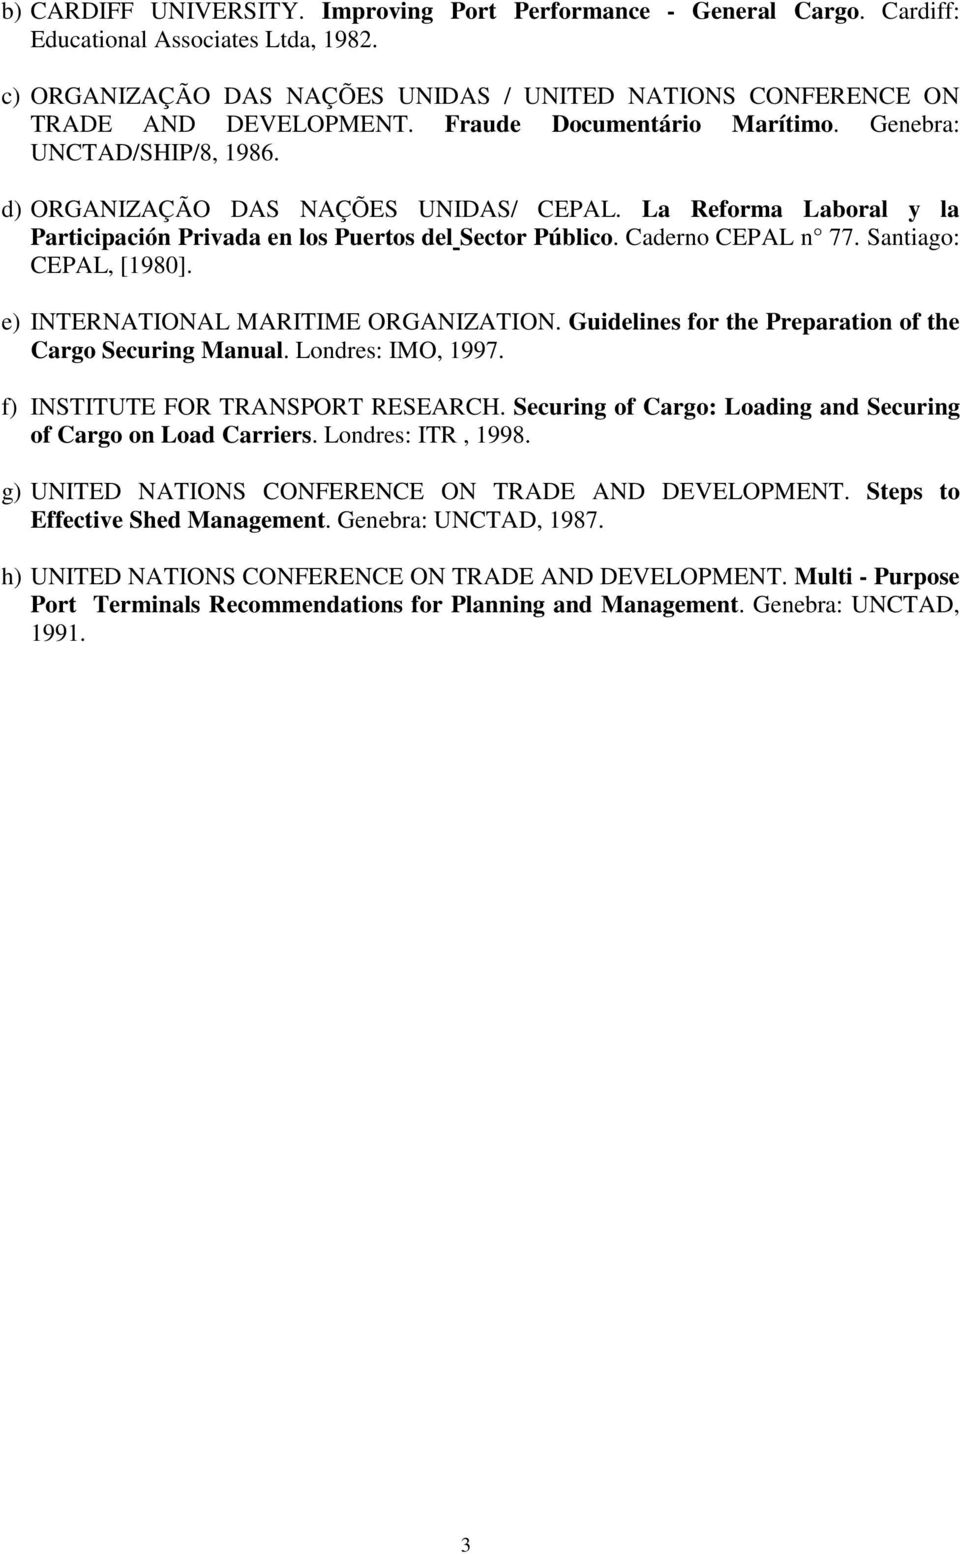 Caderno CEPAL n 77. Santiago: CEPAL, [1980]. e) INTERNATIONAL MARITIME ORGANIZATION. Guidelines for the Preparation of the Cargo Securing Manual. Londres: IMO, 1997.